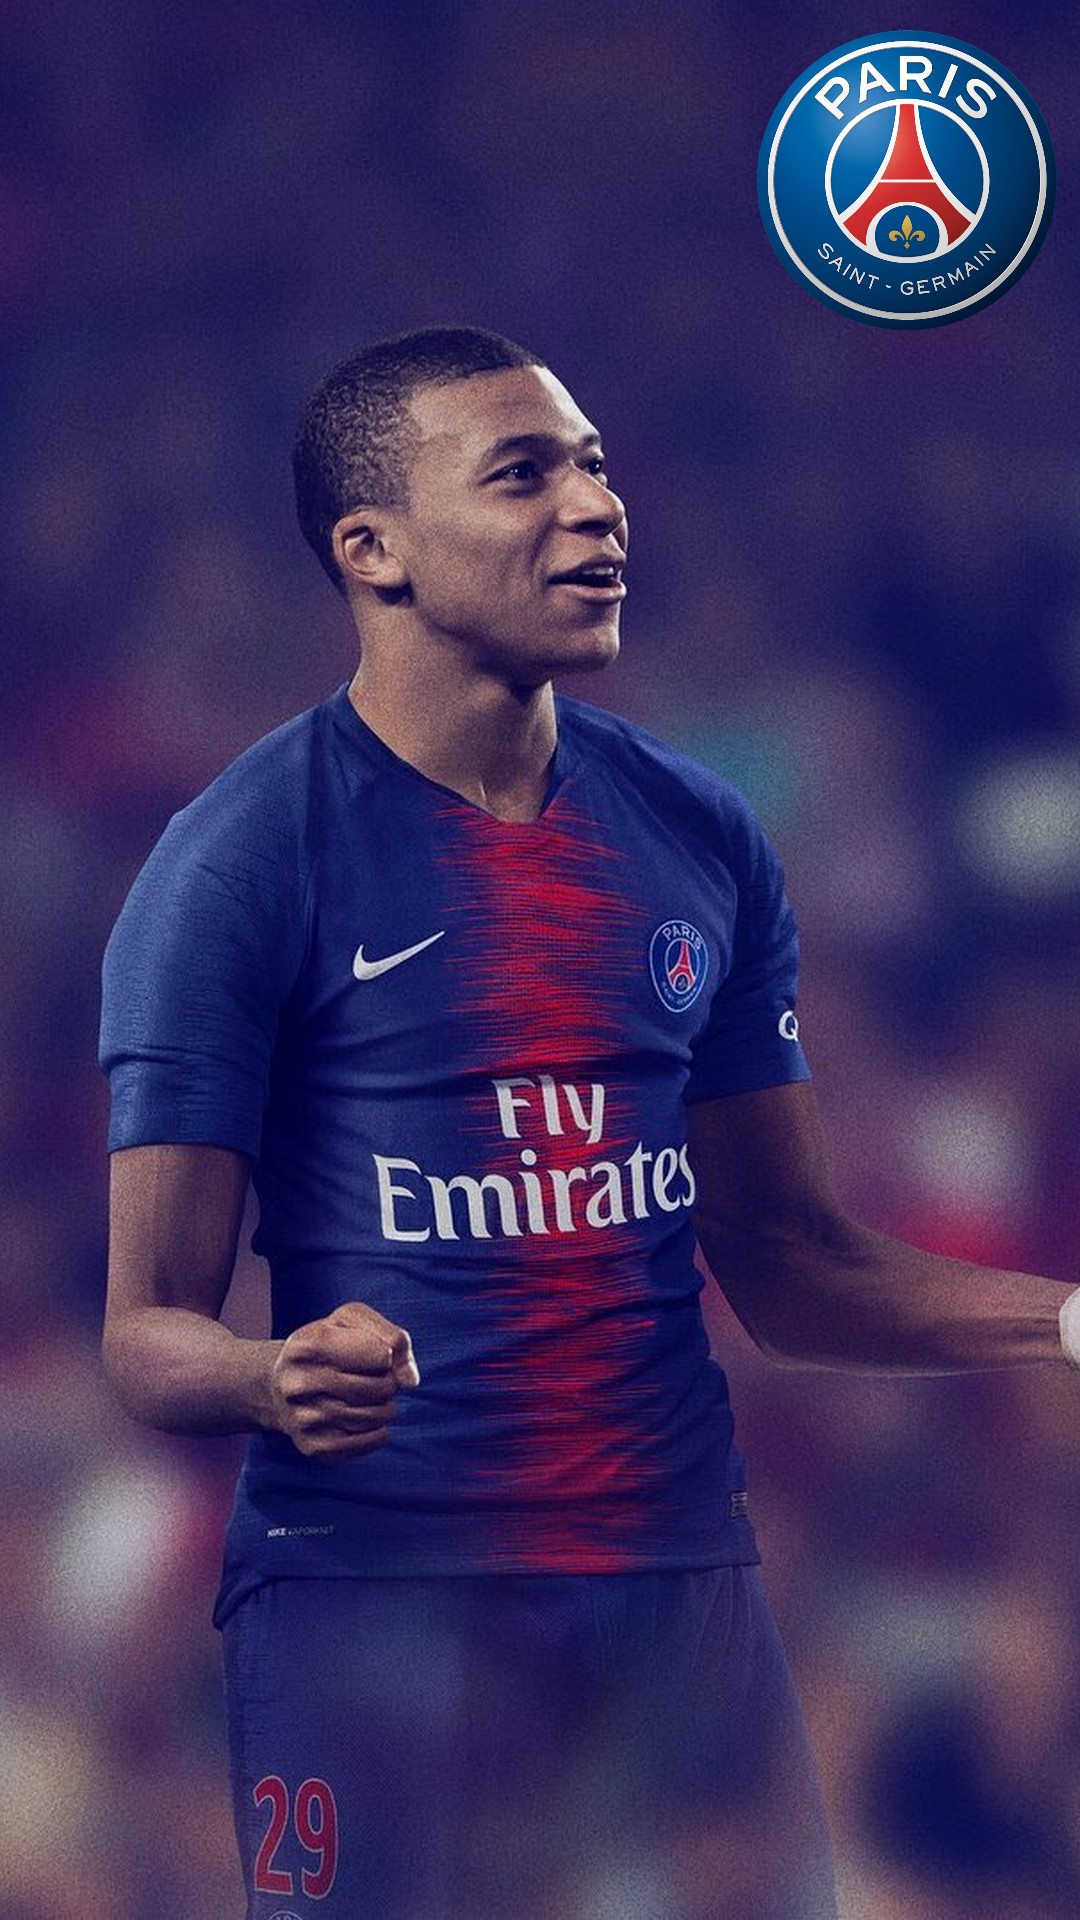 iPhone Wallpaper HD Mbappe Paris Saint-Germain With Resolution 1080X1920 pixel. You can make this wallpaper for your Mac or Windows Desktop Background, iPhone, Android or Tablet and another Smartphone device for free